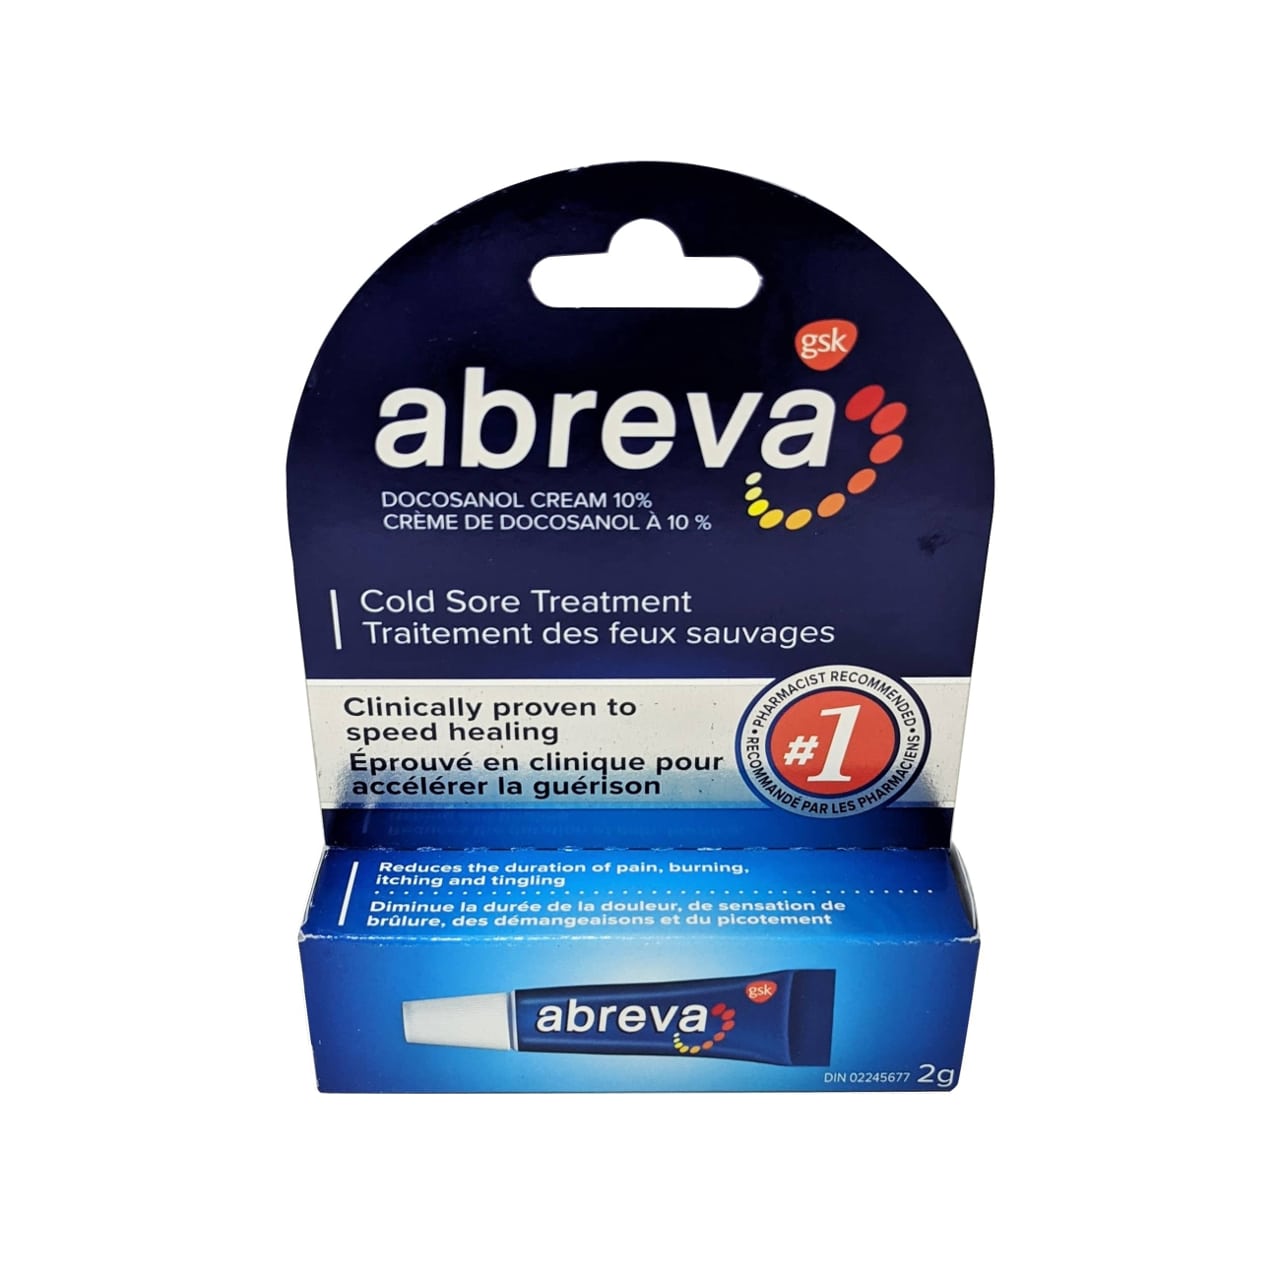 Packaging for Abreva Cold Sore Treatment Tube Cream.